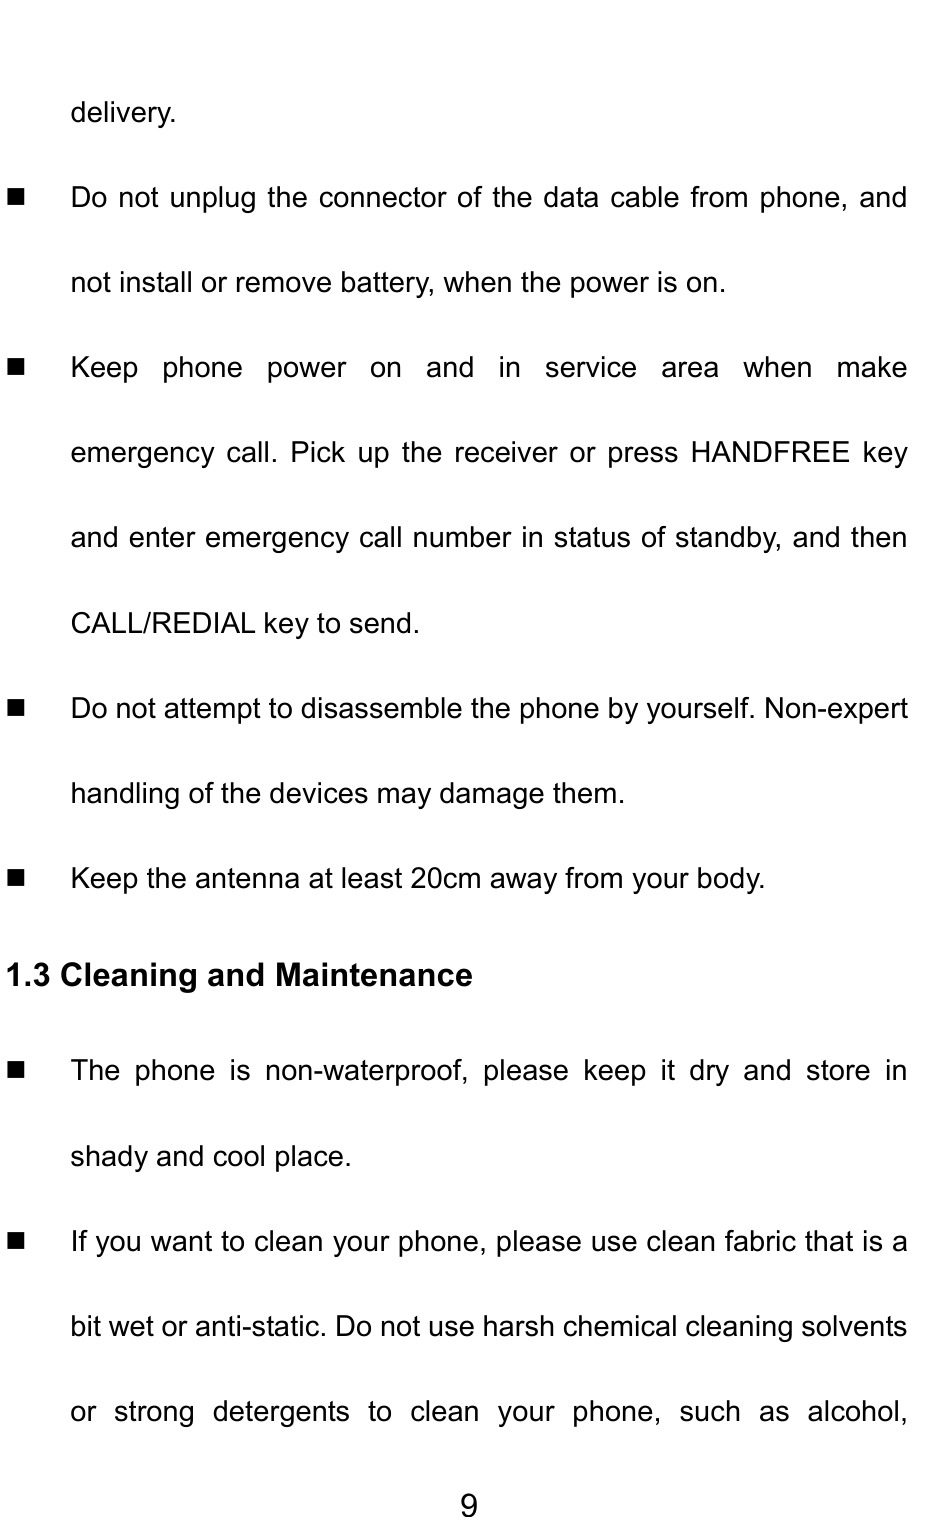                                     9delivery.   Do not unplug the connector of the data cable from phone, and not install or remove battery, when the power is on.   Keep phone power on and in service area when make emergency call. Pick up the receiver or press HANDFREE key and enter emergency call number in status of standby, and then CALL/REDIAL key to send.   Do not attempt to disassemble the phone by yourself. Non-expert handling of the devices may damage them.   Keep the antenna at least 20cm away from your body. 1.3 Cleaning and Maintenance   The phone is non-waterproof, please keep it dry and store in shady and cool place.   If you want to clean your phone, please use clean fabric that is a bit wet or anti-static. Do not use harsh chemical cleaning solvents or strong detergents to clean your phone, such as alcohol, 